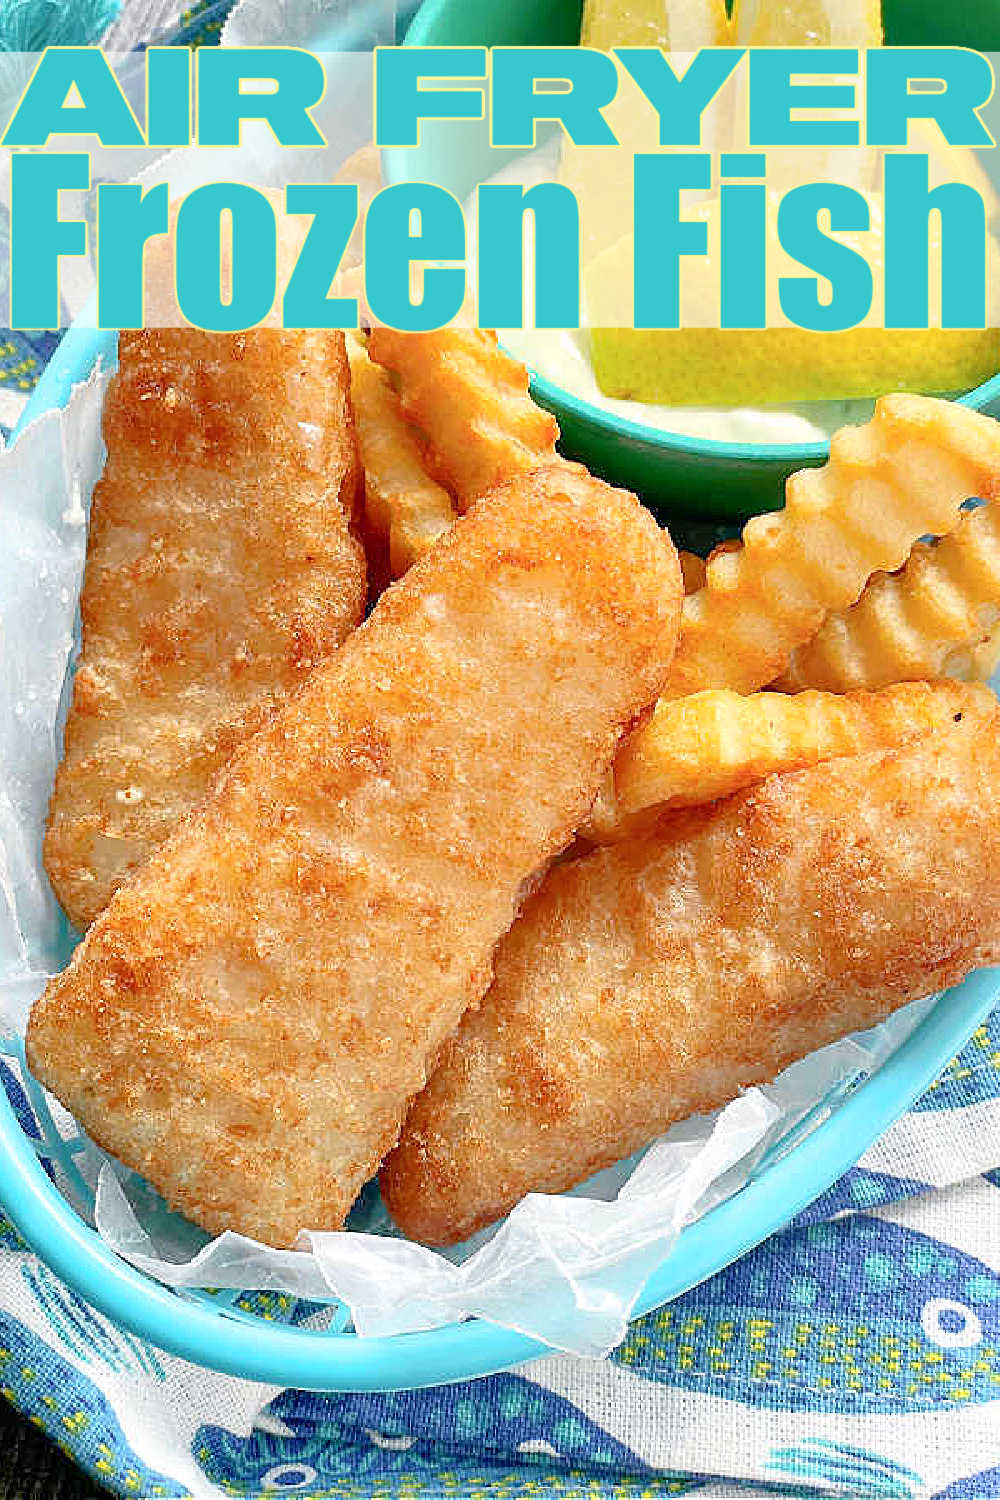 Learn how to cook Air Fryer Frozen Fish (any type and any brand) to create three super simple meals - fish and chips, fish sandwiches and fish tacos! via @foodtasticmom